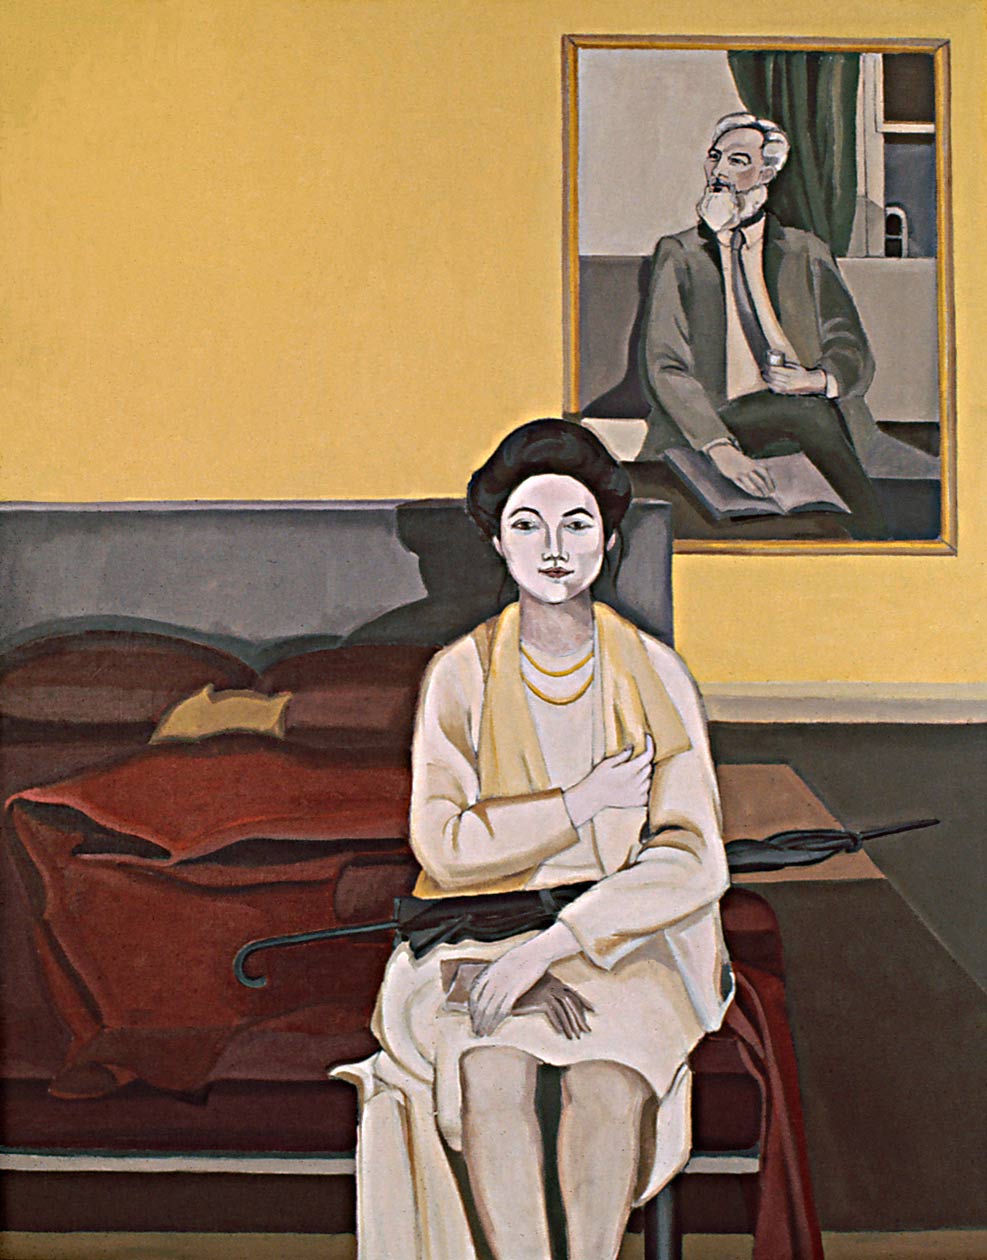 Alice Baber and Paul Jenkins by Ethel Fisher, 1967, oil on canvas, 51 x 40 inches, twentieth century figure painting.